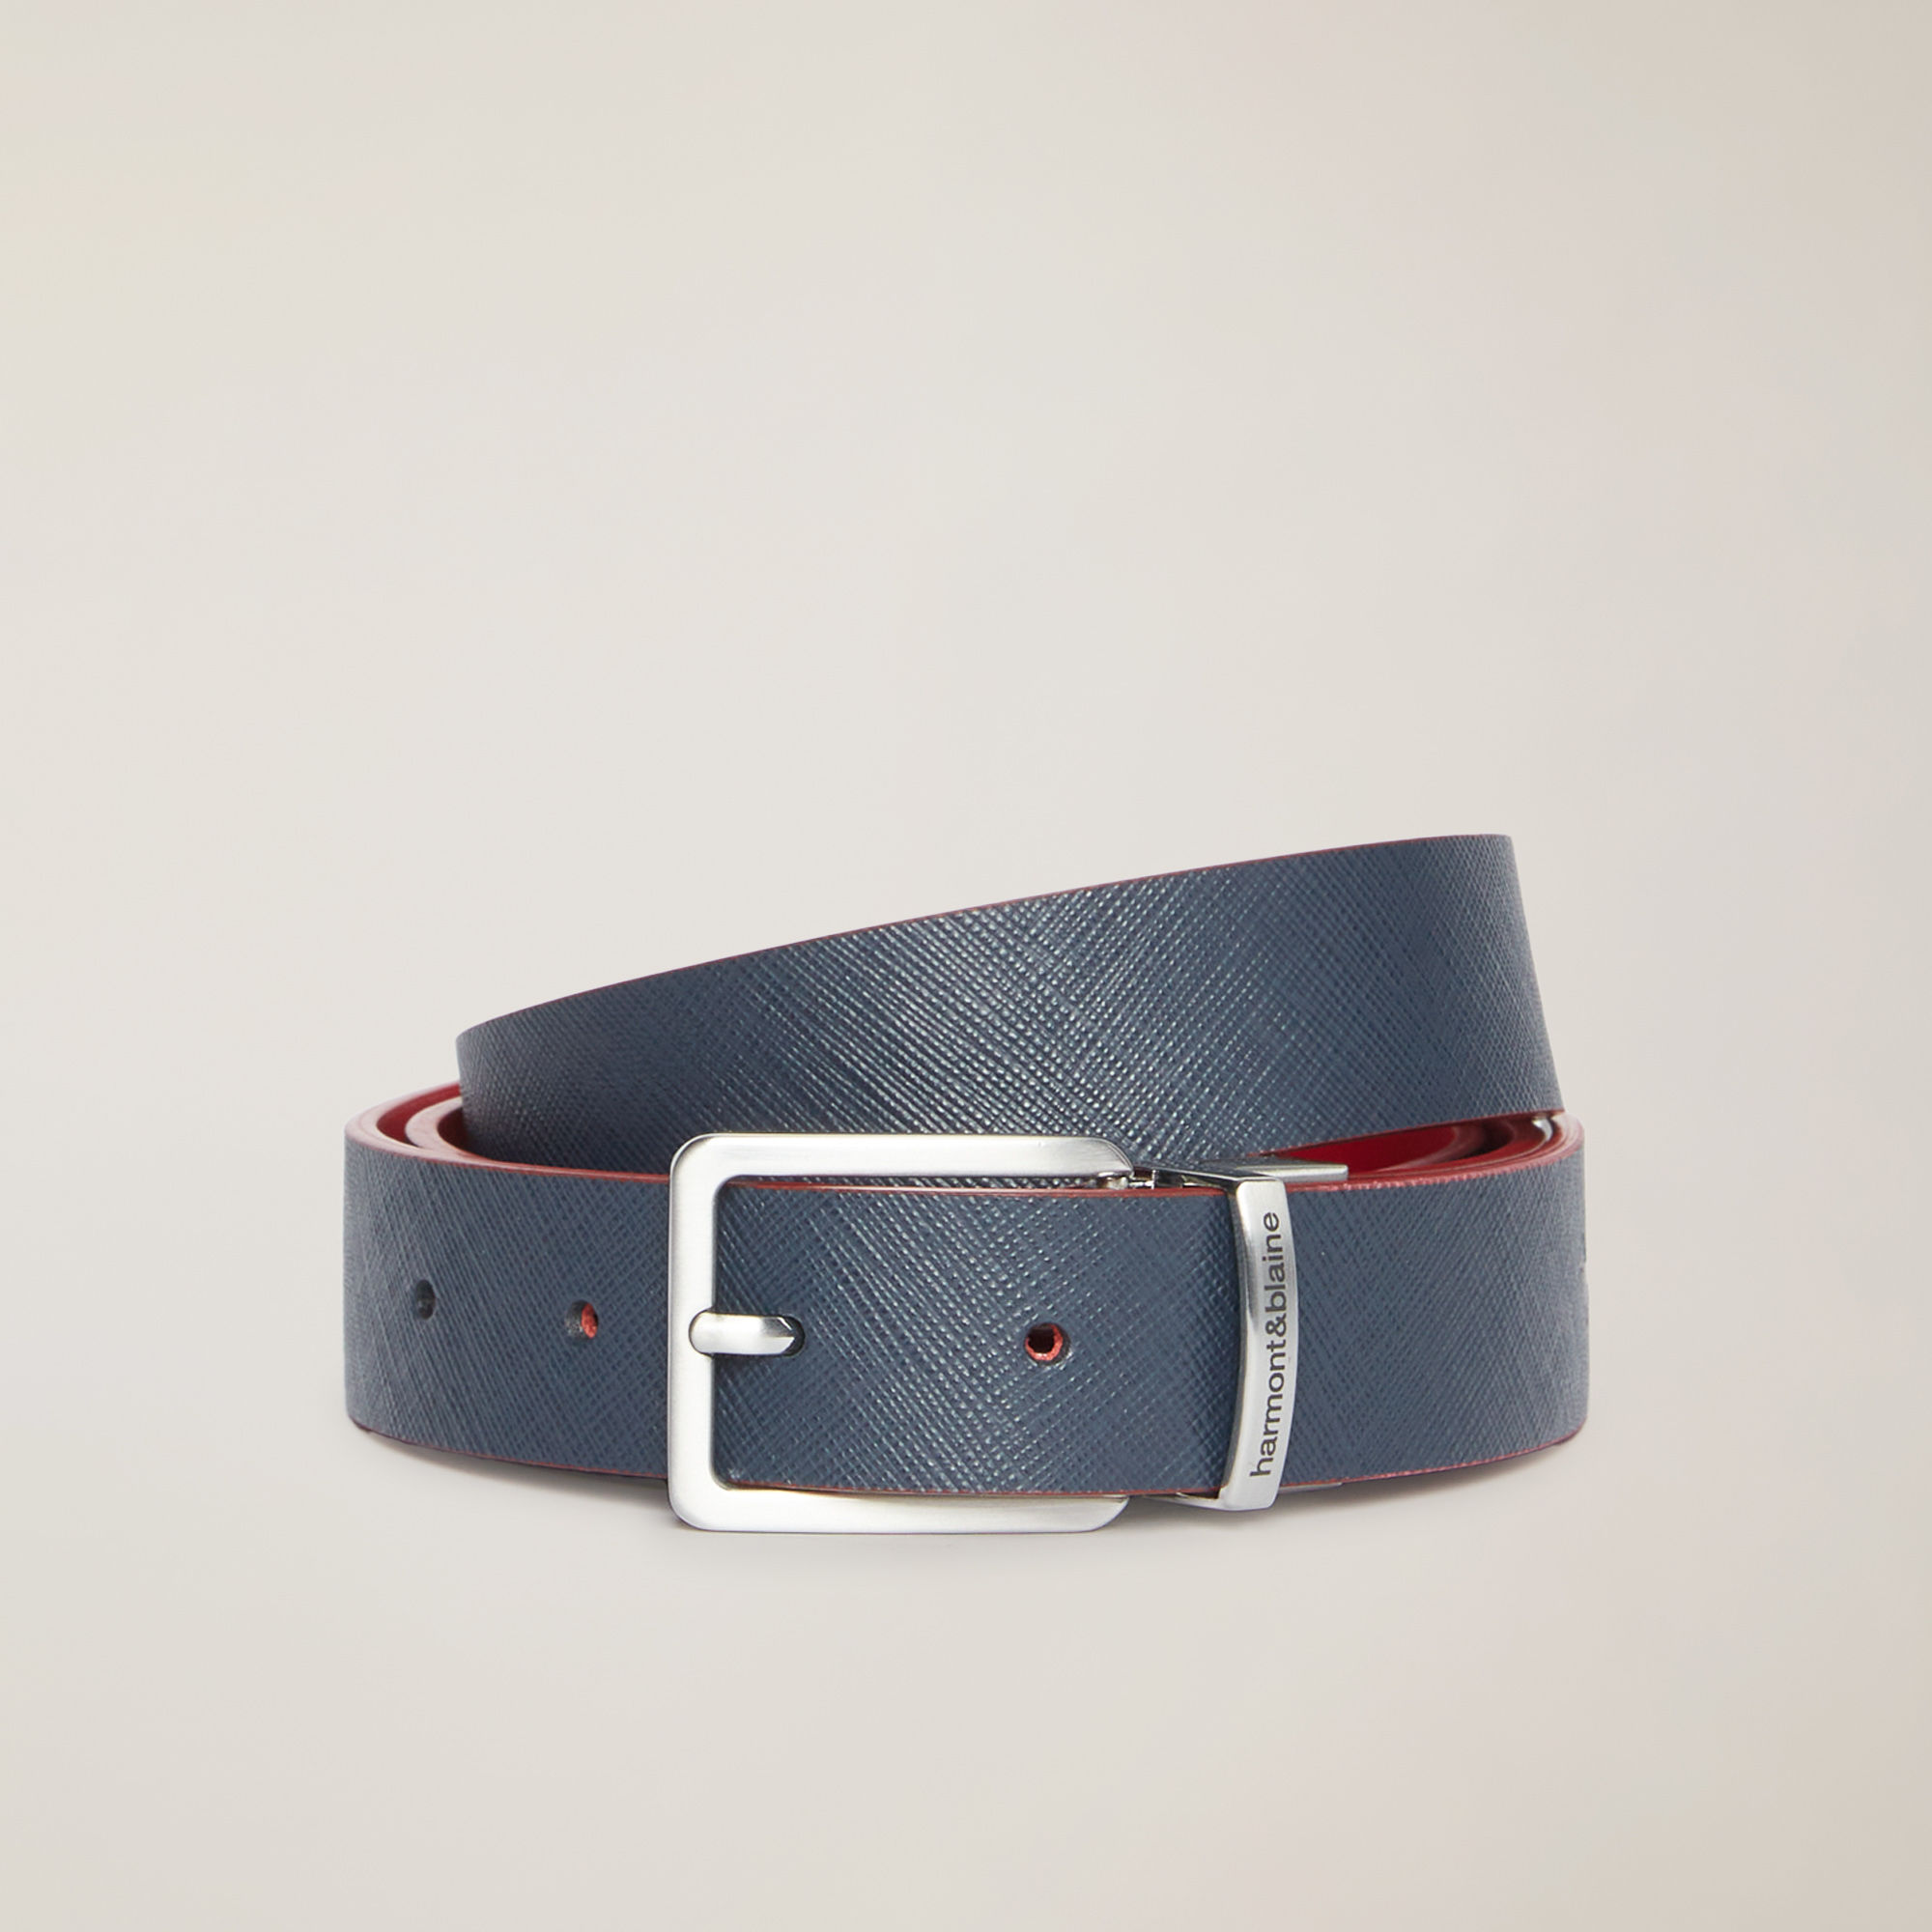 Two-Tone Belt With Lettering, Blue/Red, large